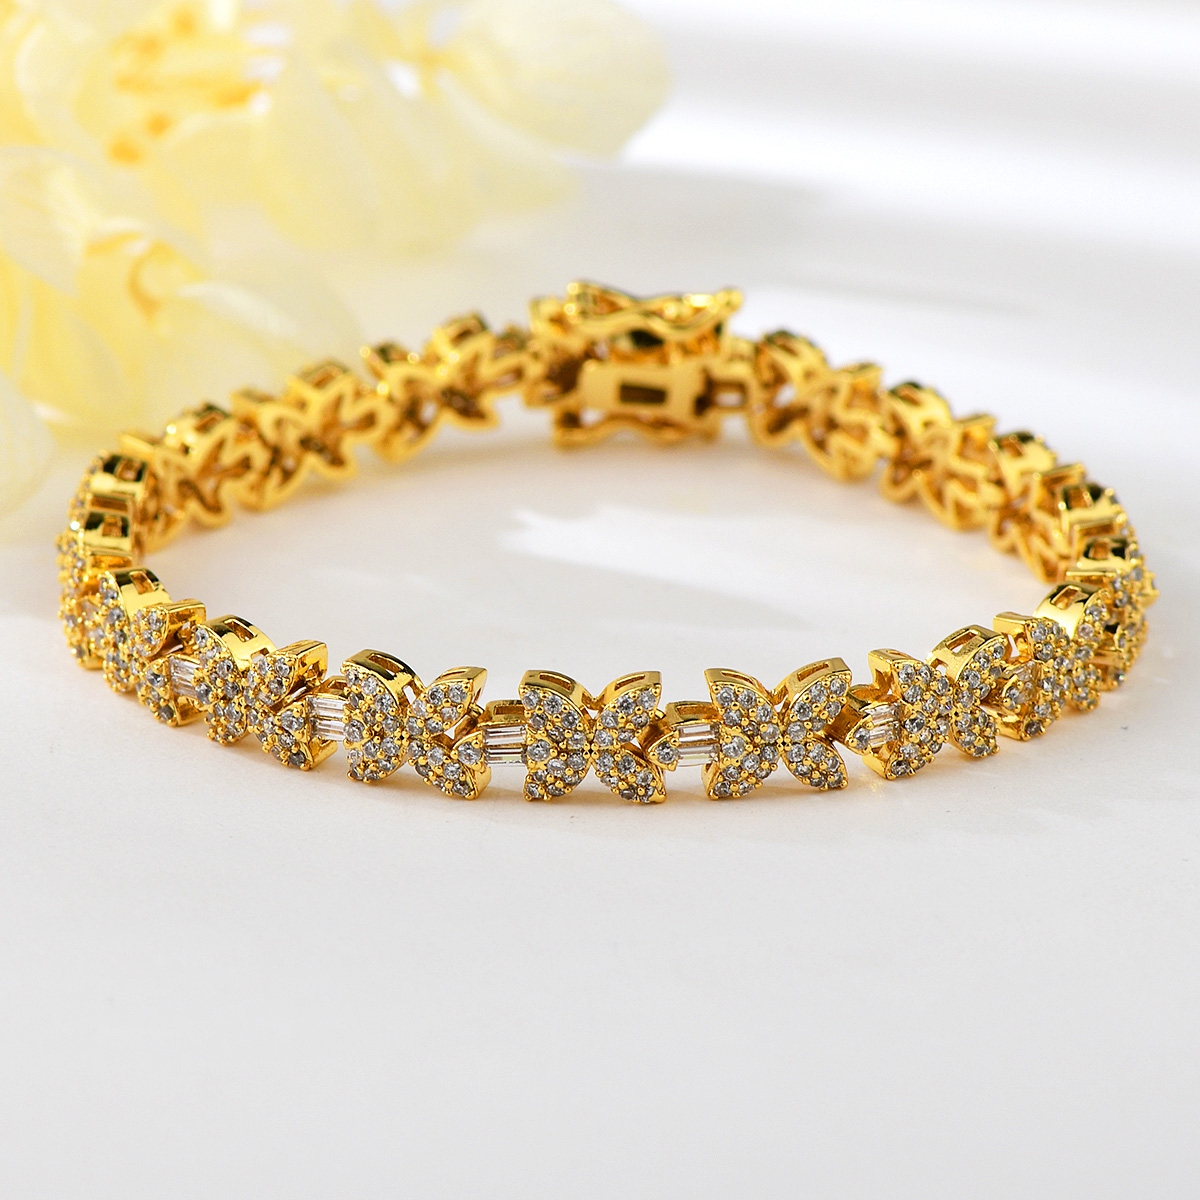 Great Value White Gold Plated Tennis Bracelet for Ladies